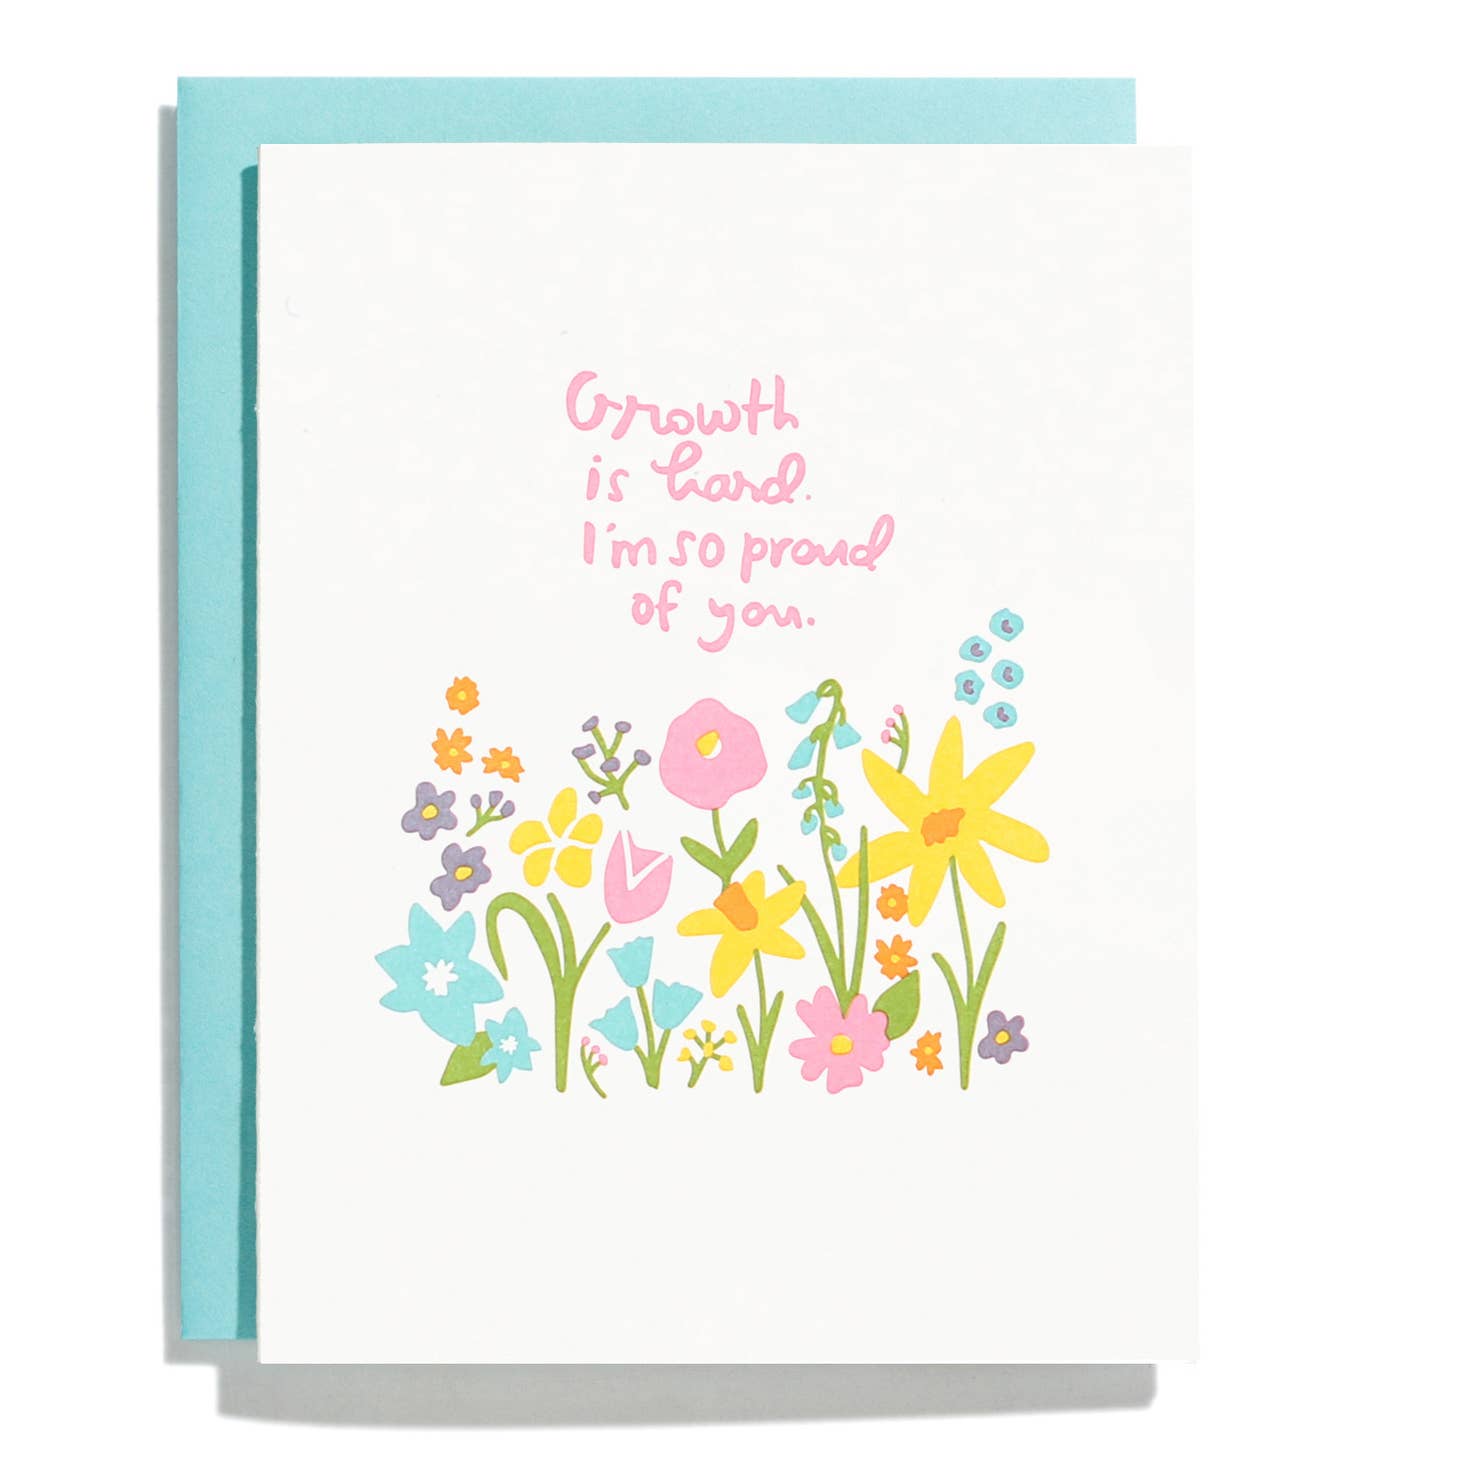 White background with flower garden in pink, lilac, orange, yellow, and green. Pink text says, “Growth is hard I’m so proud of you”. Aqua envelope is included. 